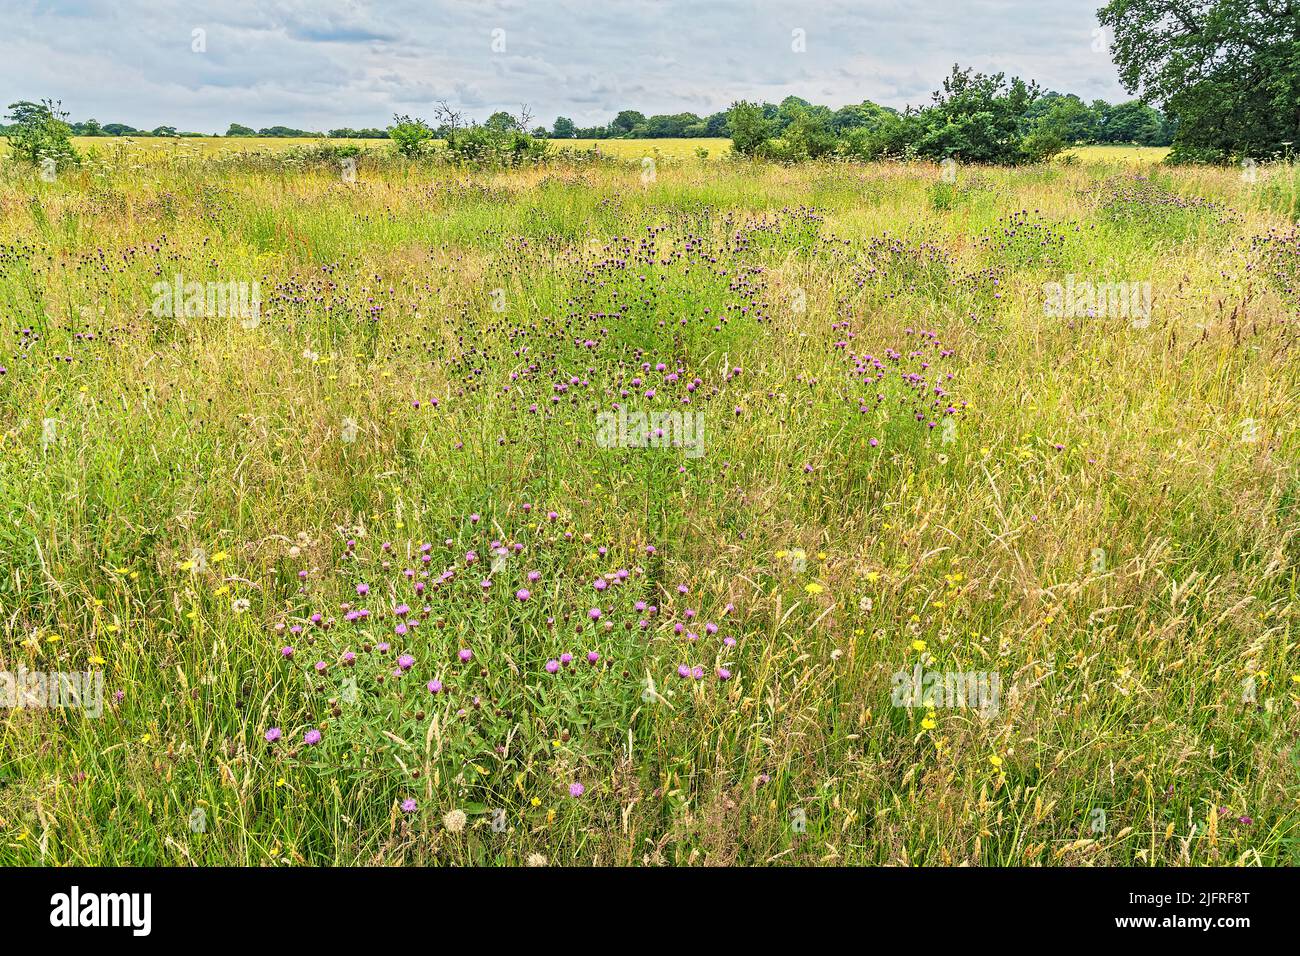 Wildflowers mainly Black Knapweed (Centaurea nigra) growing in meadow used for silage on an organic beef farm Wirral Cheshire UK July 2021 Stock Photo